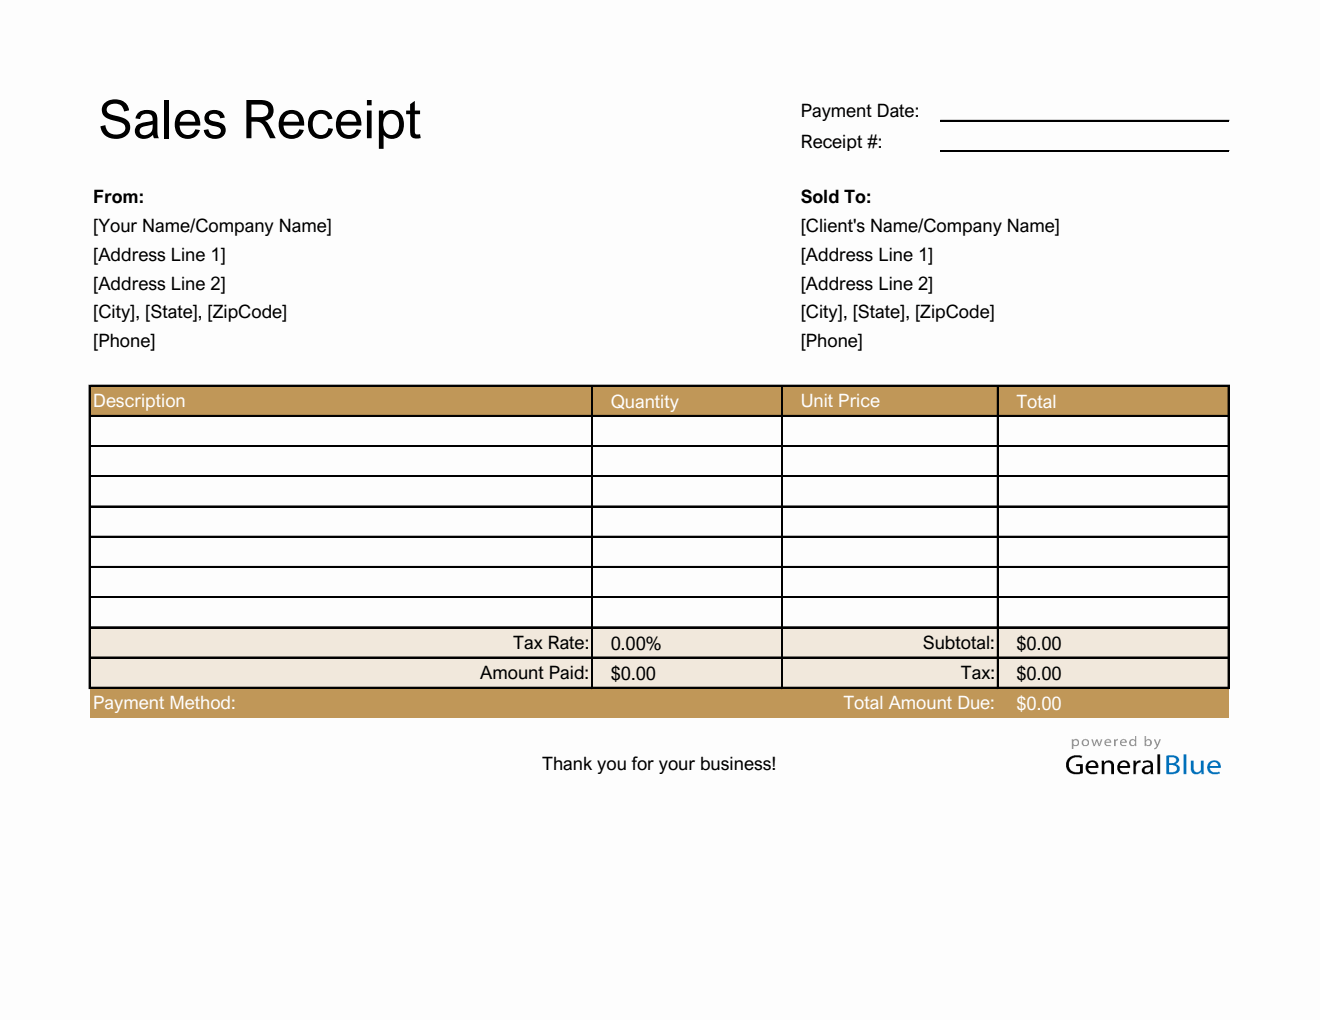 Sales Receipt Template in Excel (Basic)